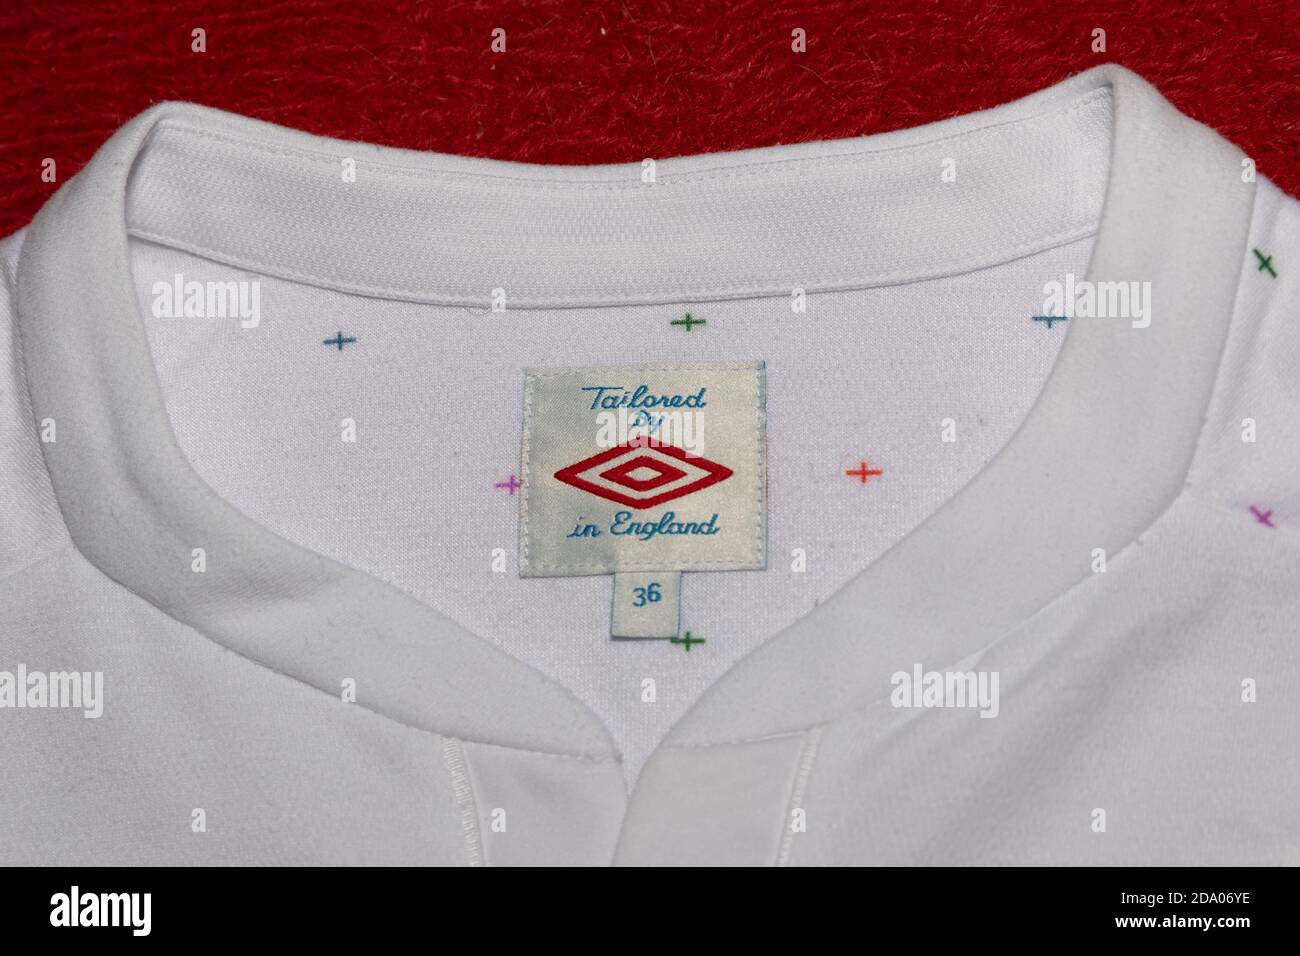 Tailored By Umbro in England" label in the neck of the 2010 - 2011 England  Home Football Shirt Stock Photo - Alamy